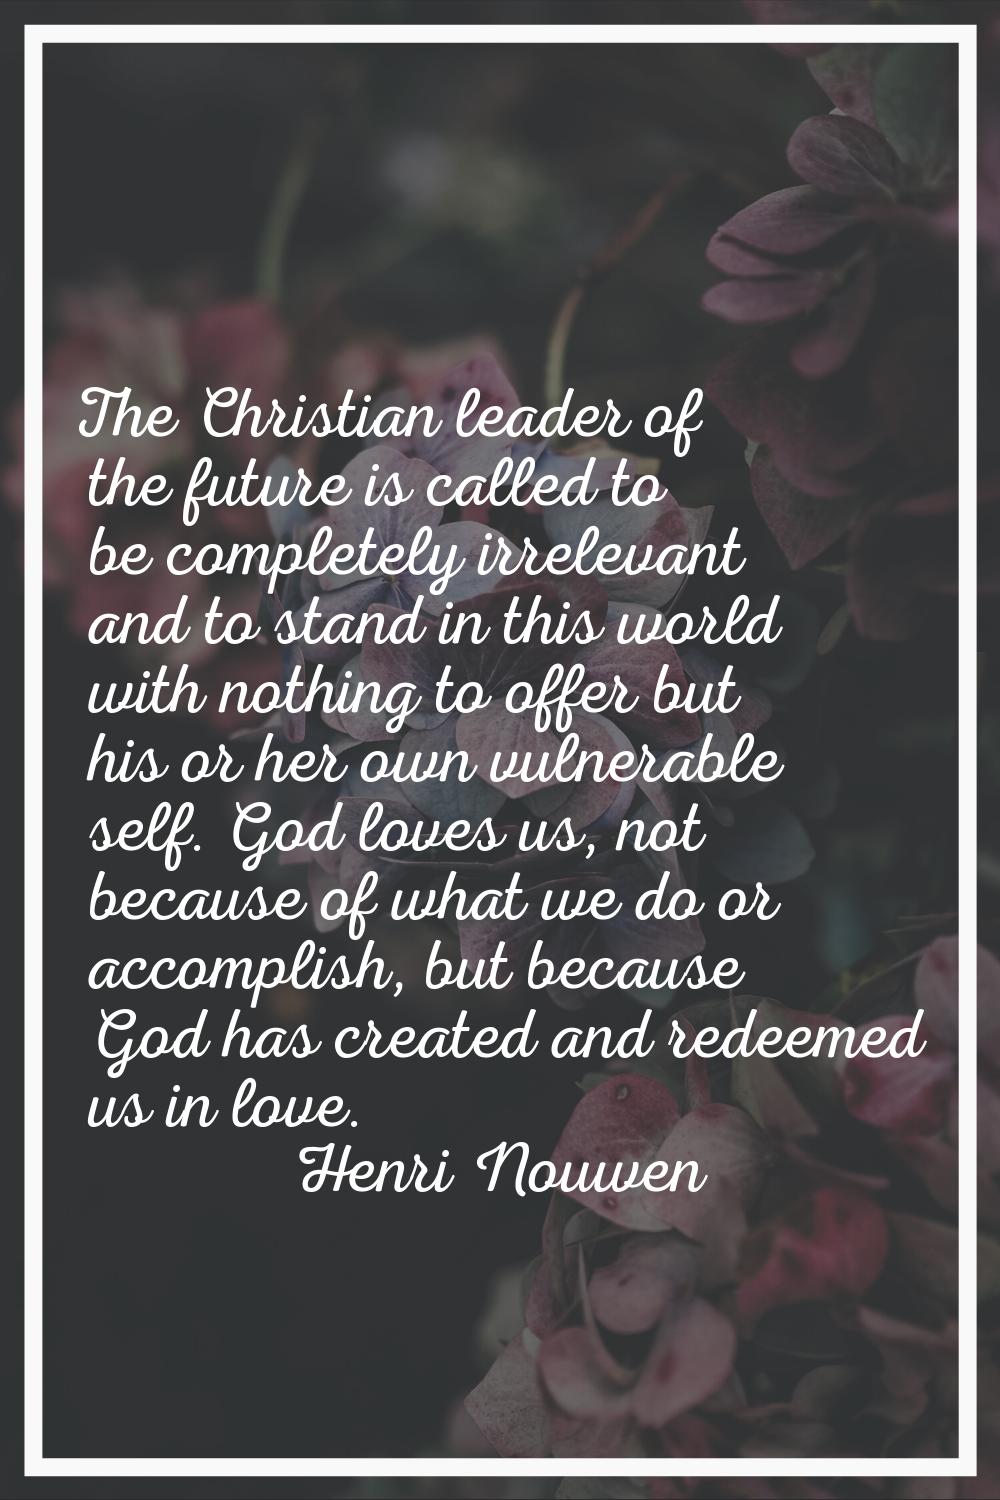 The Christian leader of the future is called to be completely irrelevant and to stand in this world